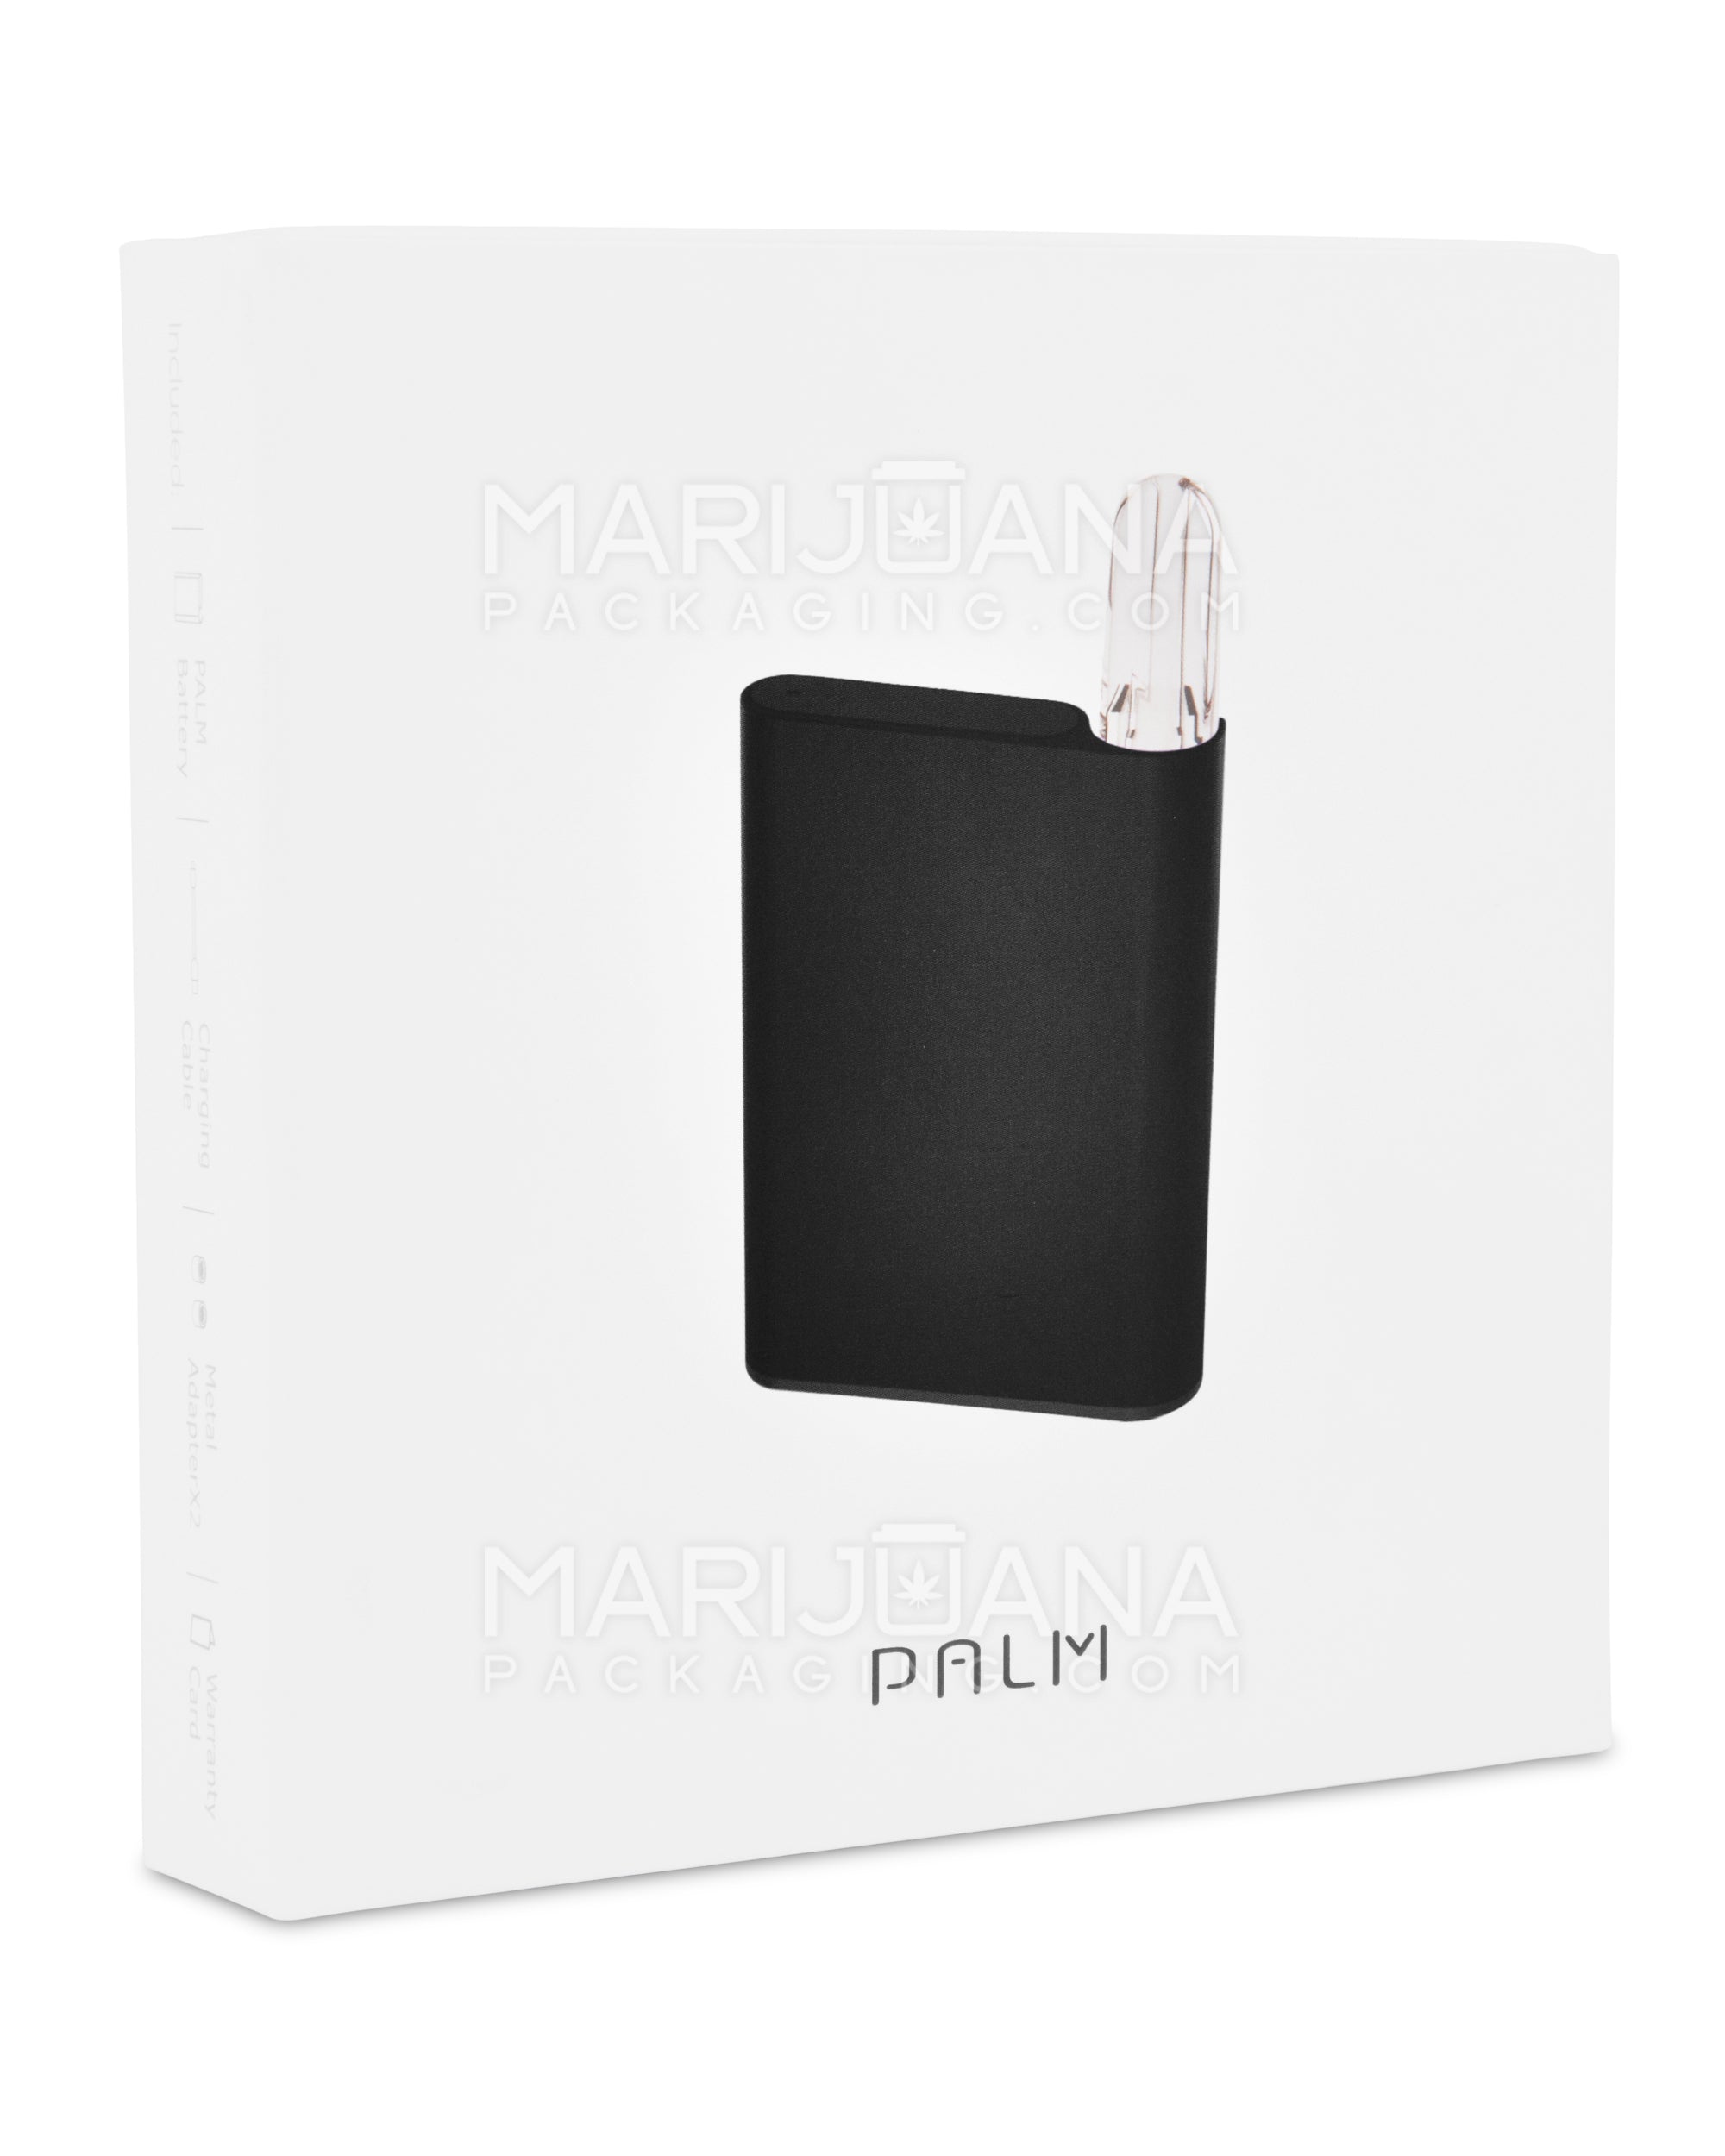 CCELL | Palm Vape Battery with USB Charger | 500mAh - Black - 510 Thread - 8